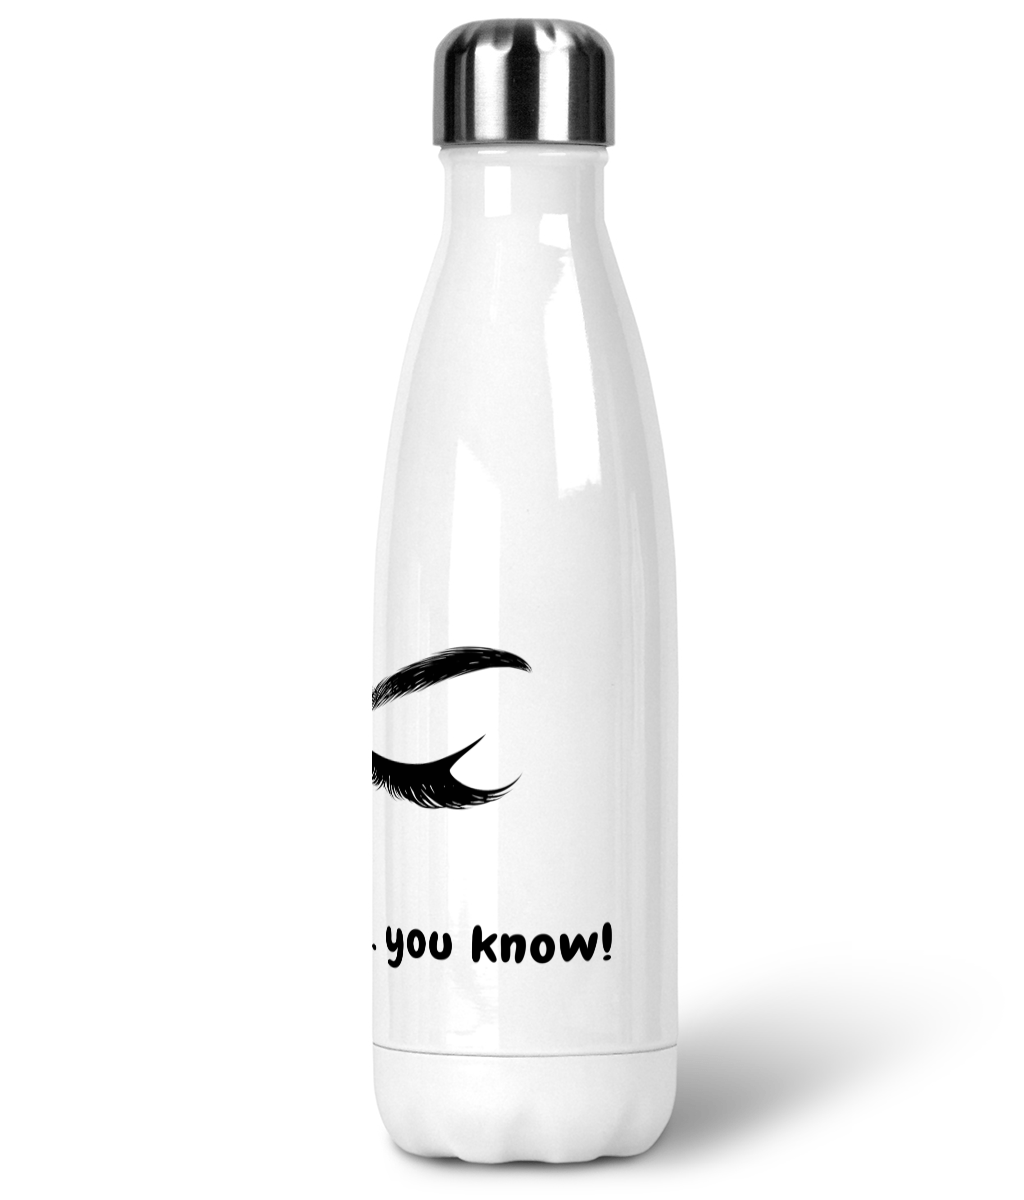 Stainless Steel 'If you know ... you know!' Water Bottle 500ml